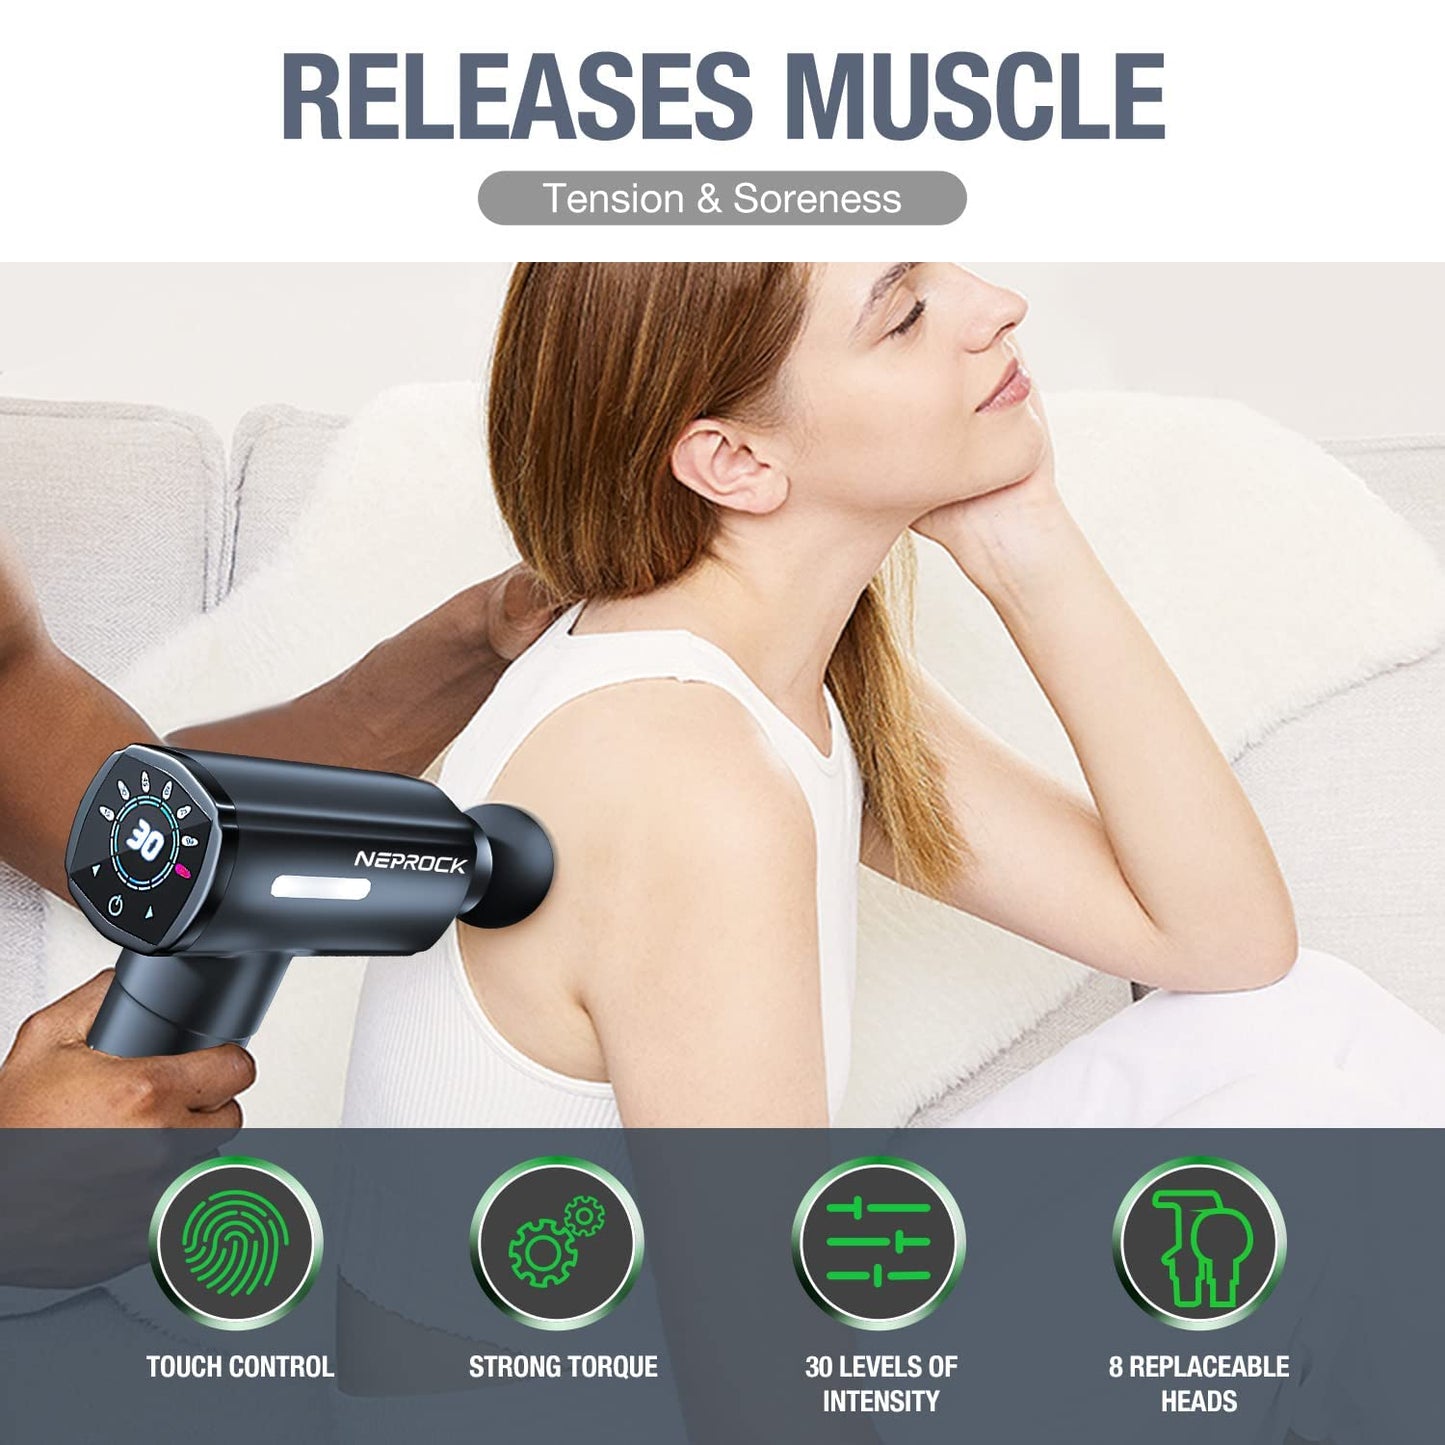 Fathers Day Gift, Massage Gun, Muscle Massage Gun Deep Tissue Percussion Massager Gun, Electric Body Handheld Gun Massager for Back Pain Relief, Gifts for Women Men Mom Dad Gifts for Him or Her